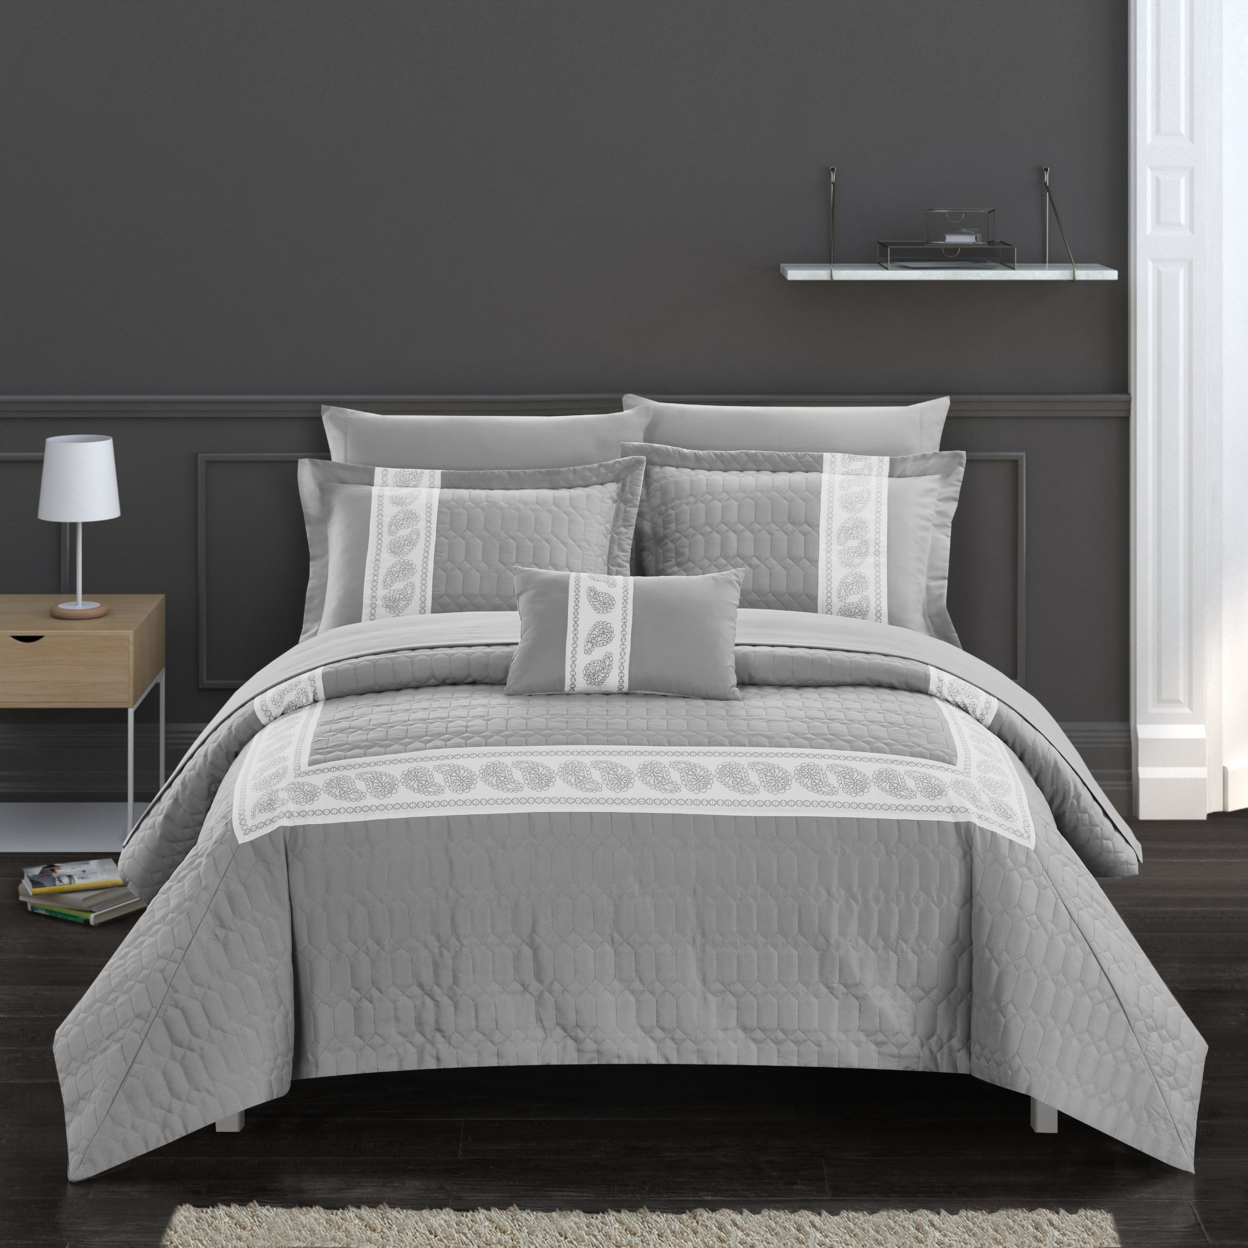 Keegan 8 Or 6 Piece Comforter Set Hotel Collection Hexagon Embossed Paisley Print Border Design Bed In A Bag - Grey, King